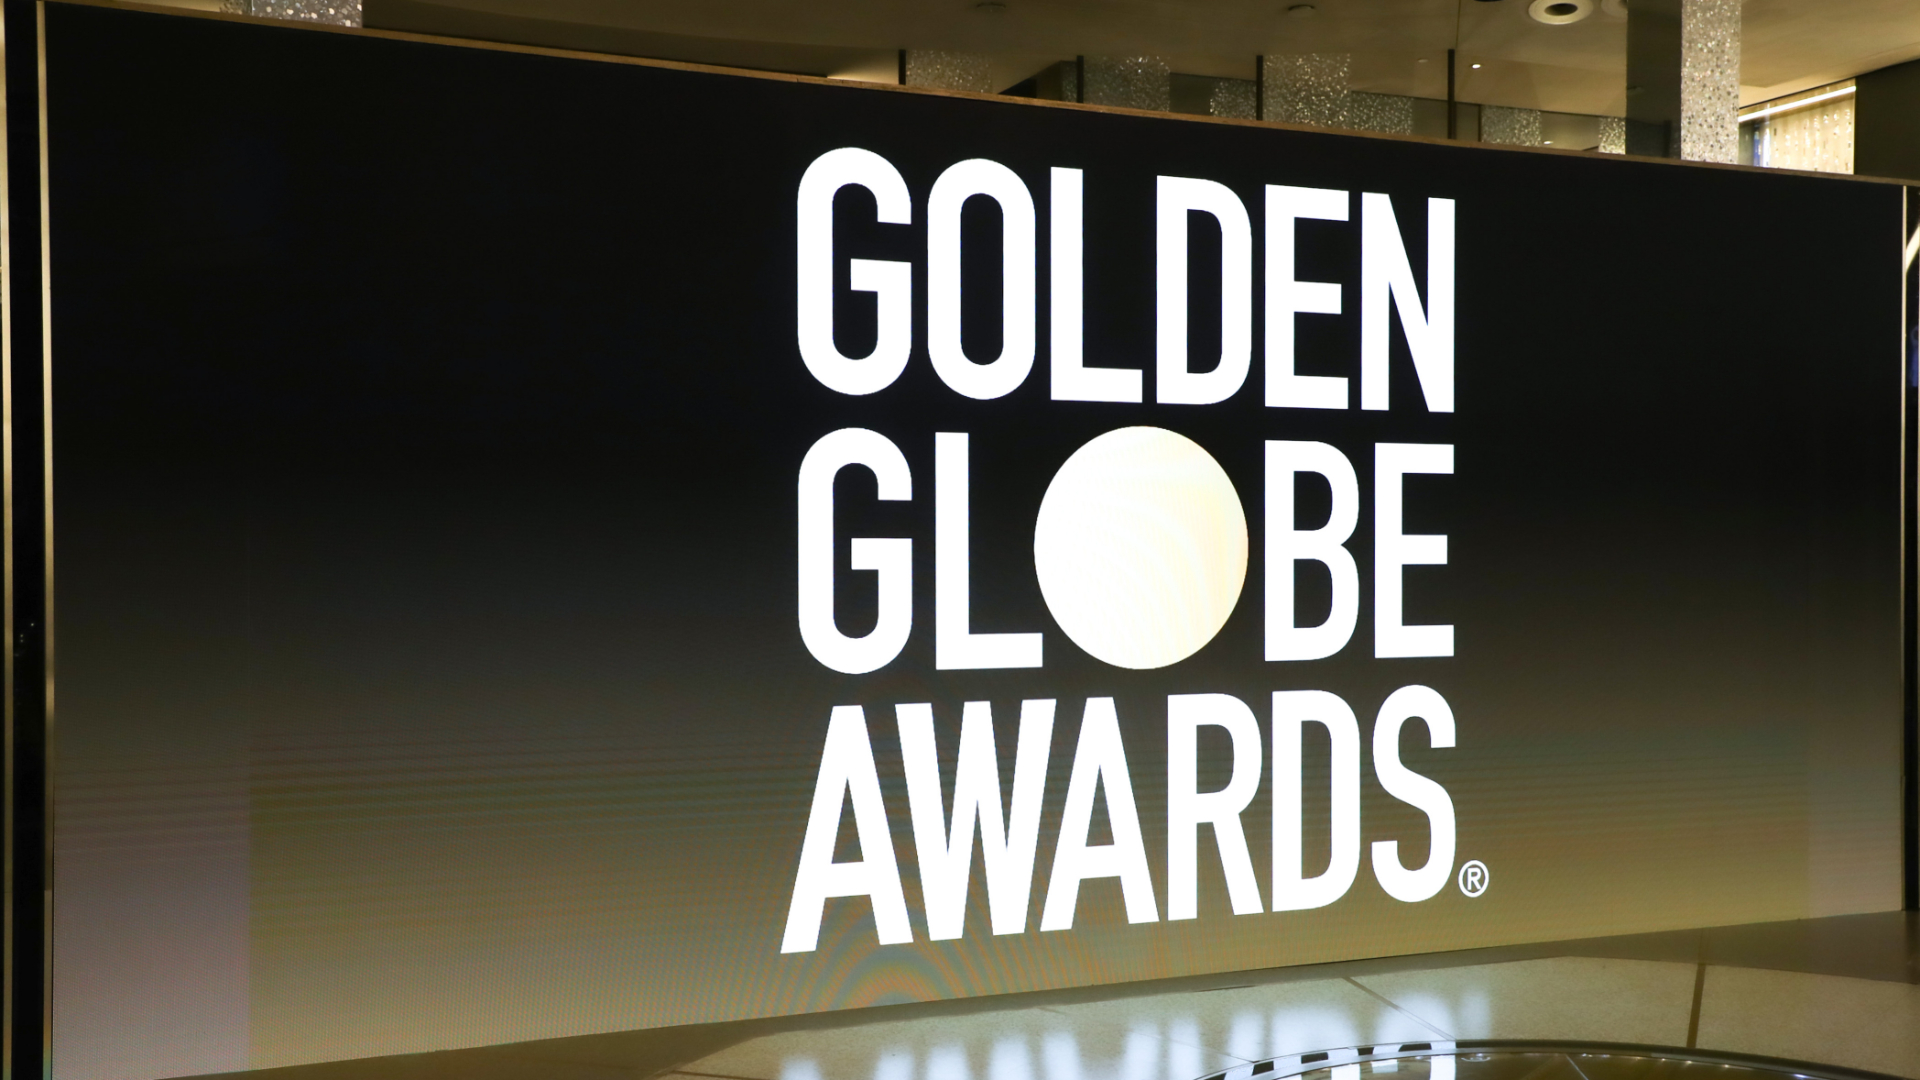 Here Are the 2021 Golden Globes Winners